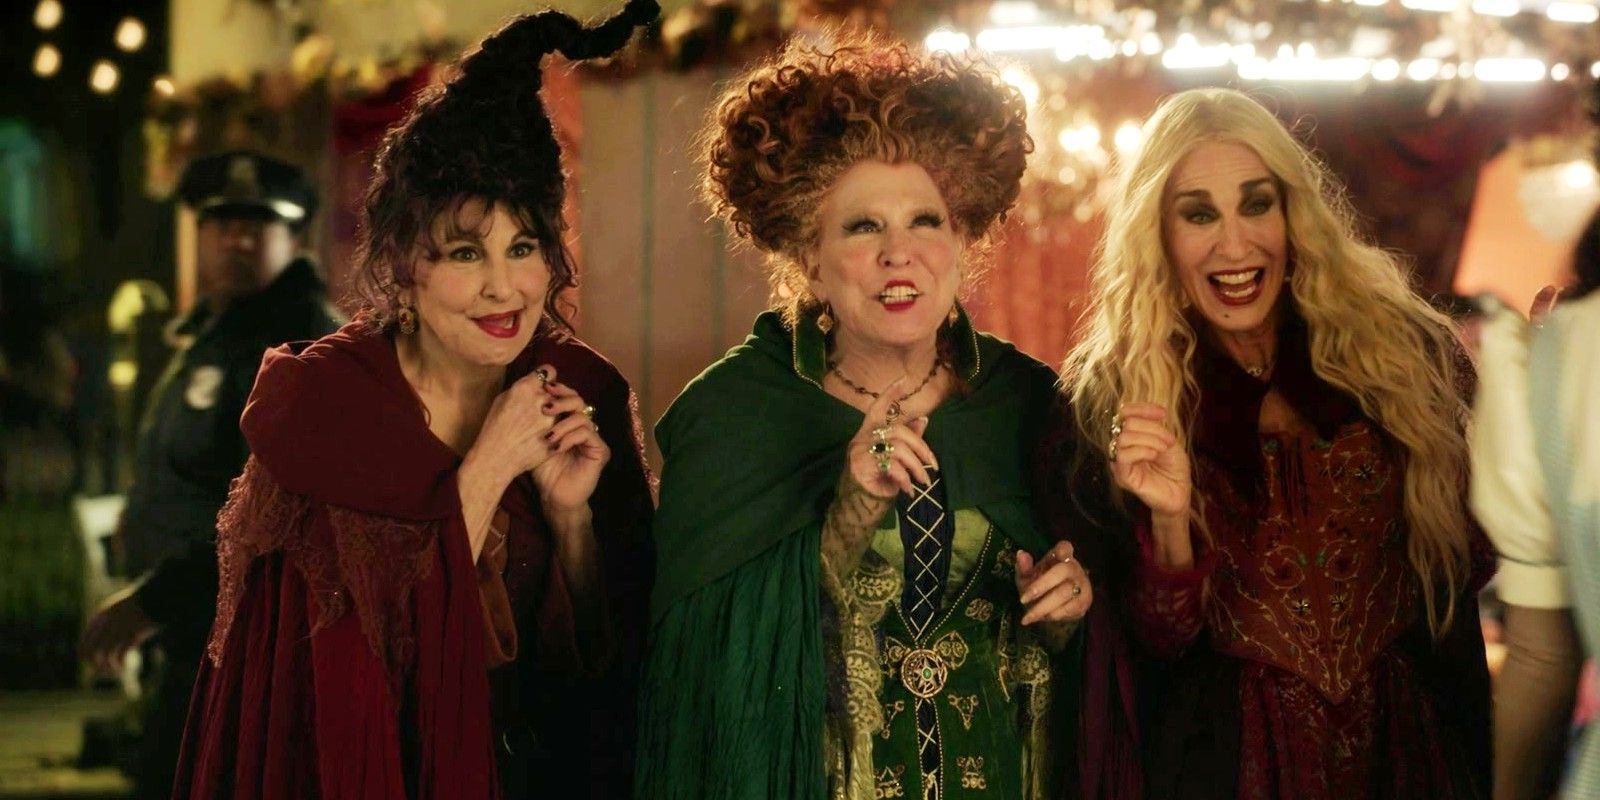 The Sanderson sisters excited to see something in Hocus Pocus 2